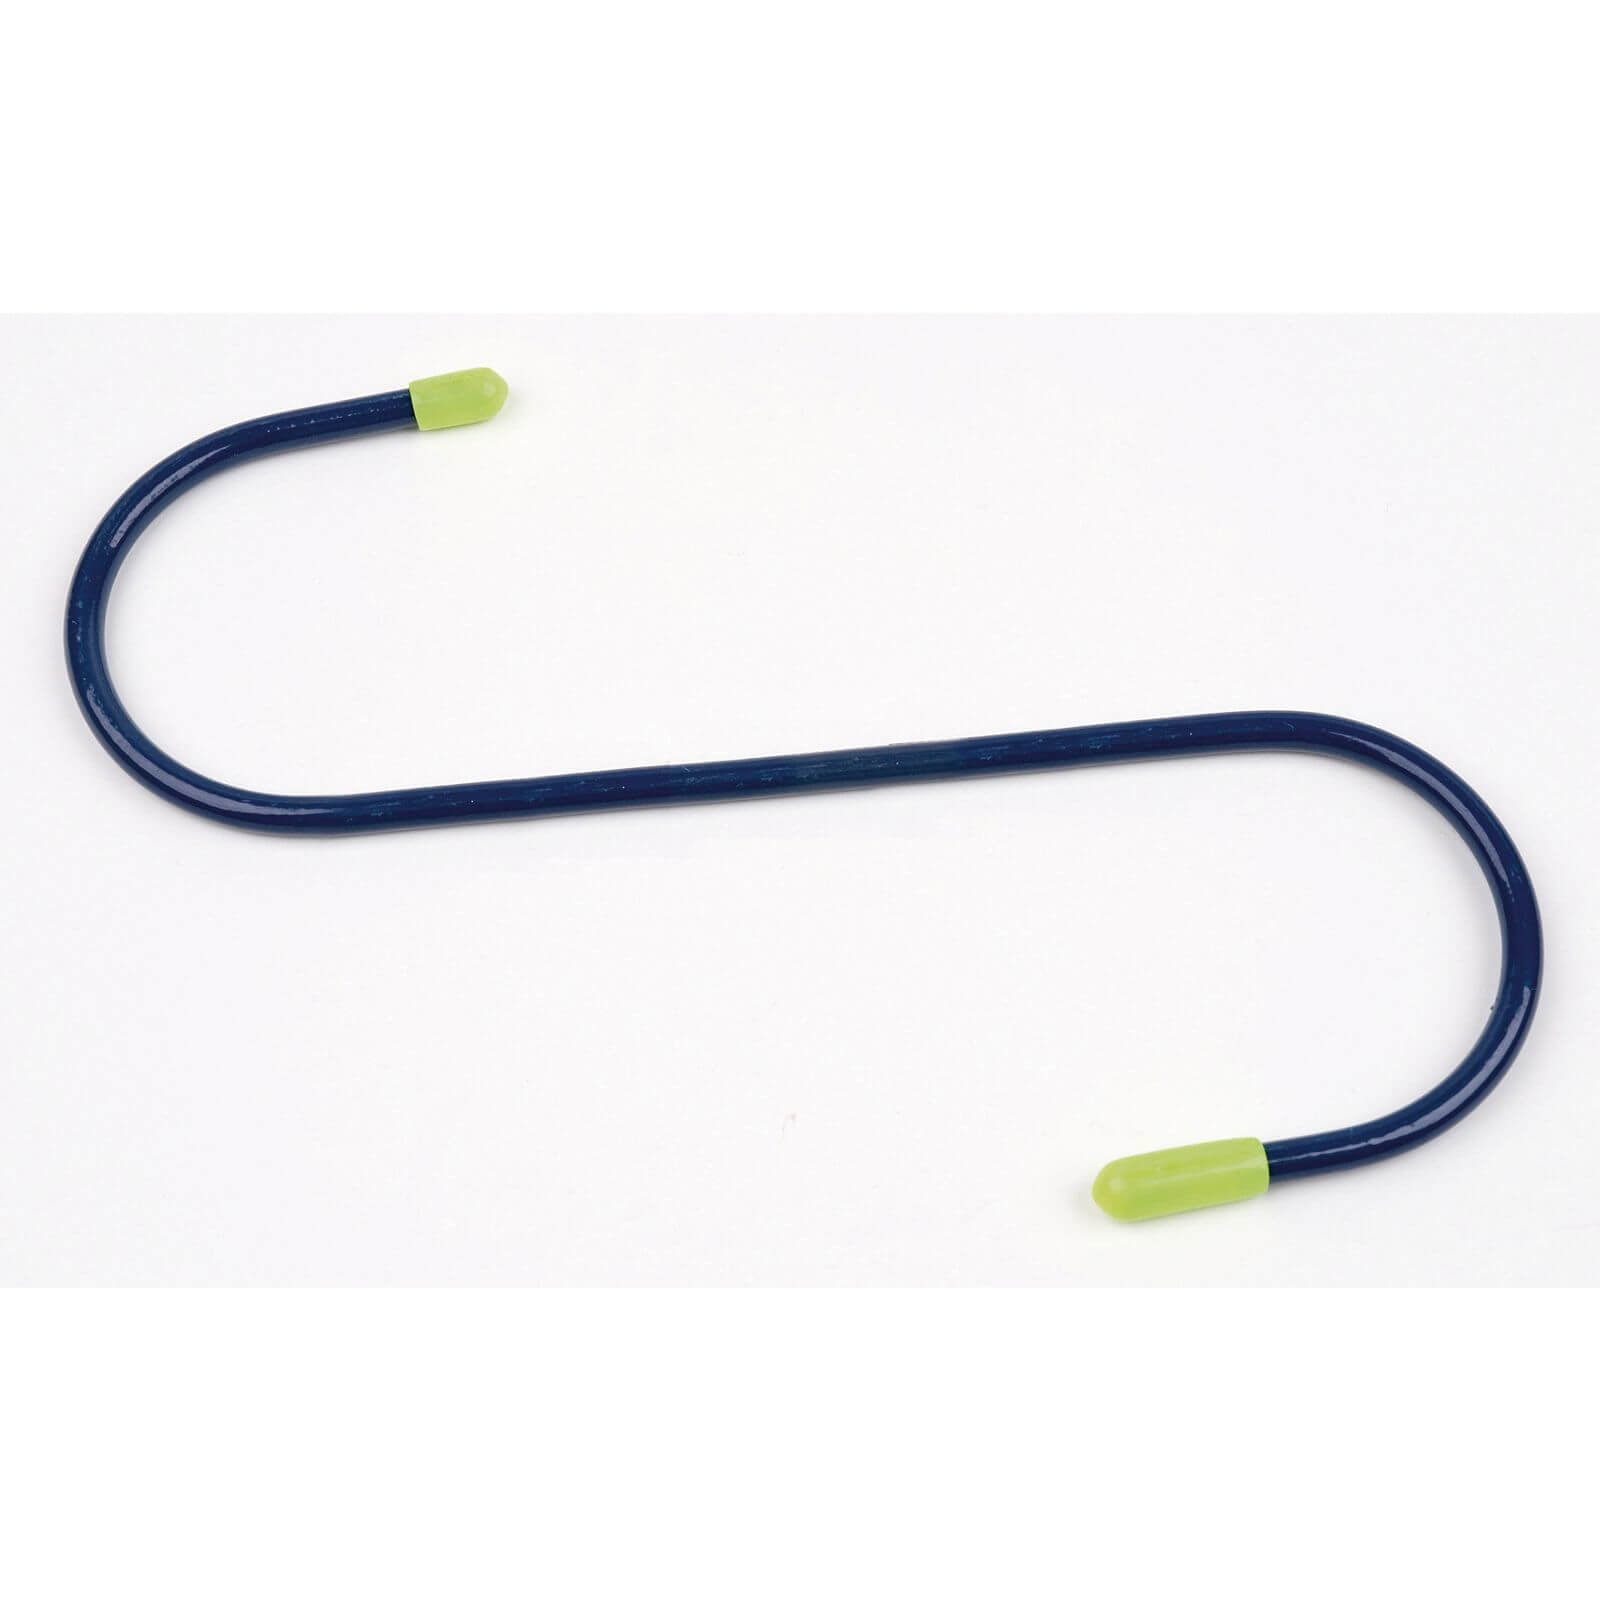 Suspension Hook - Blue and Green - 200mm